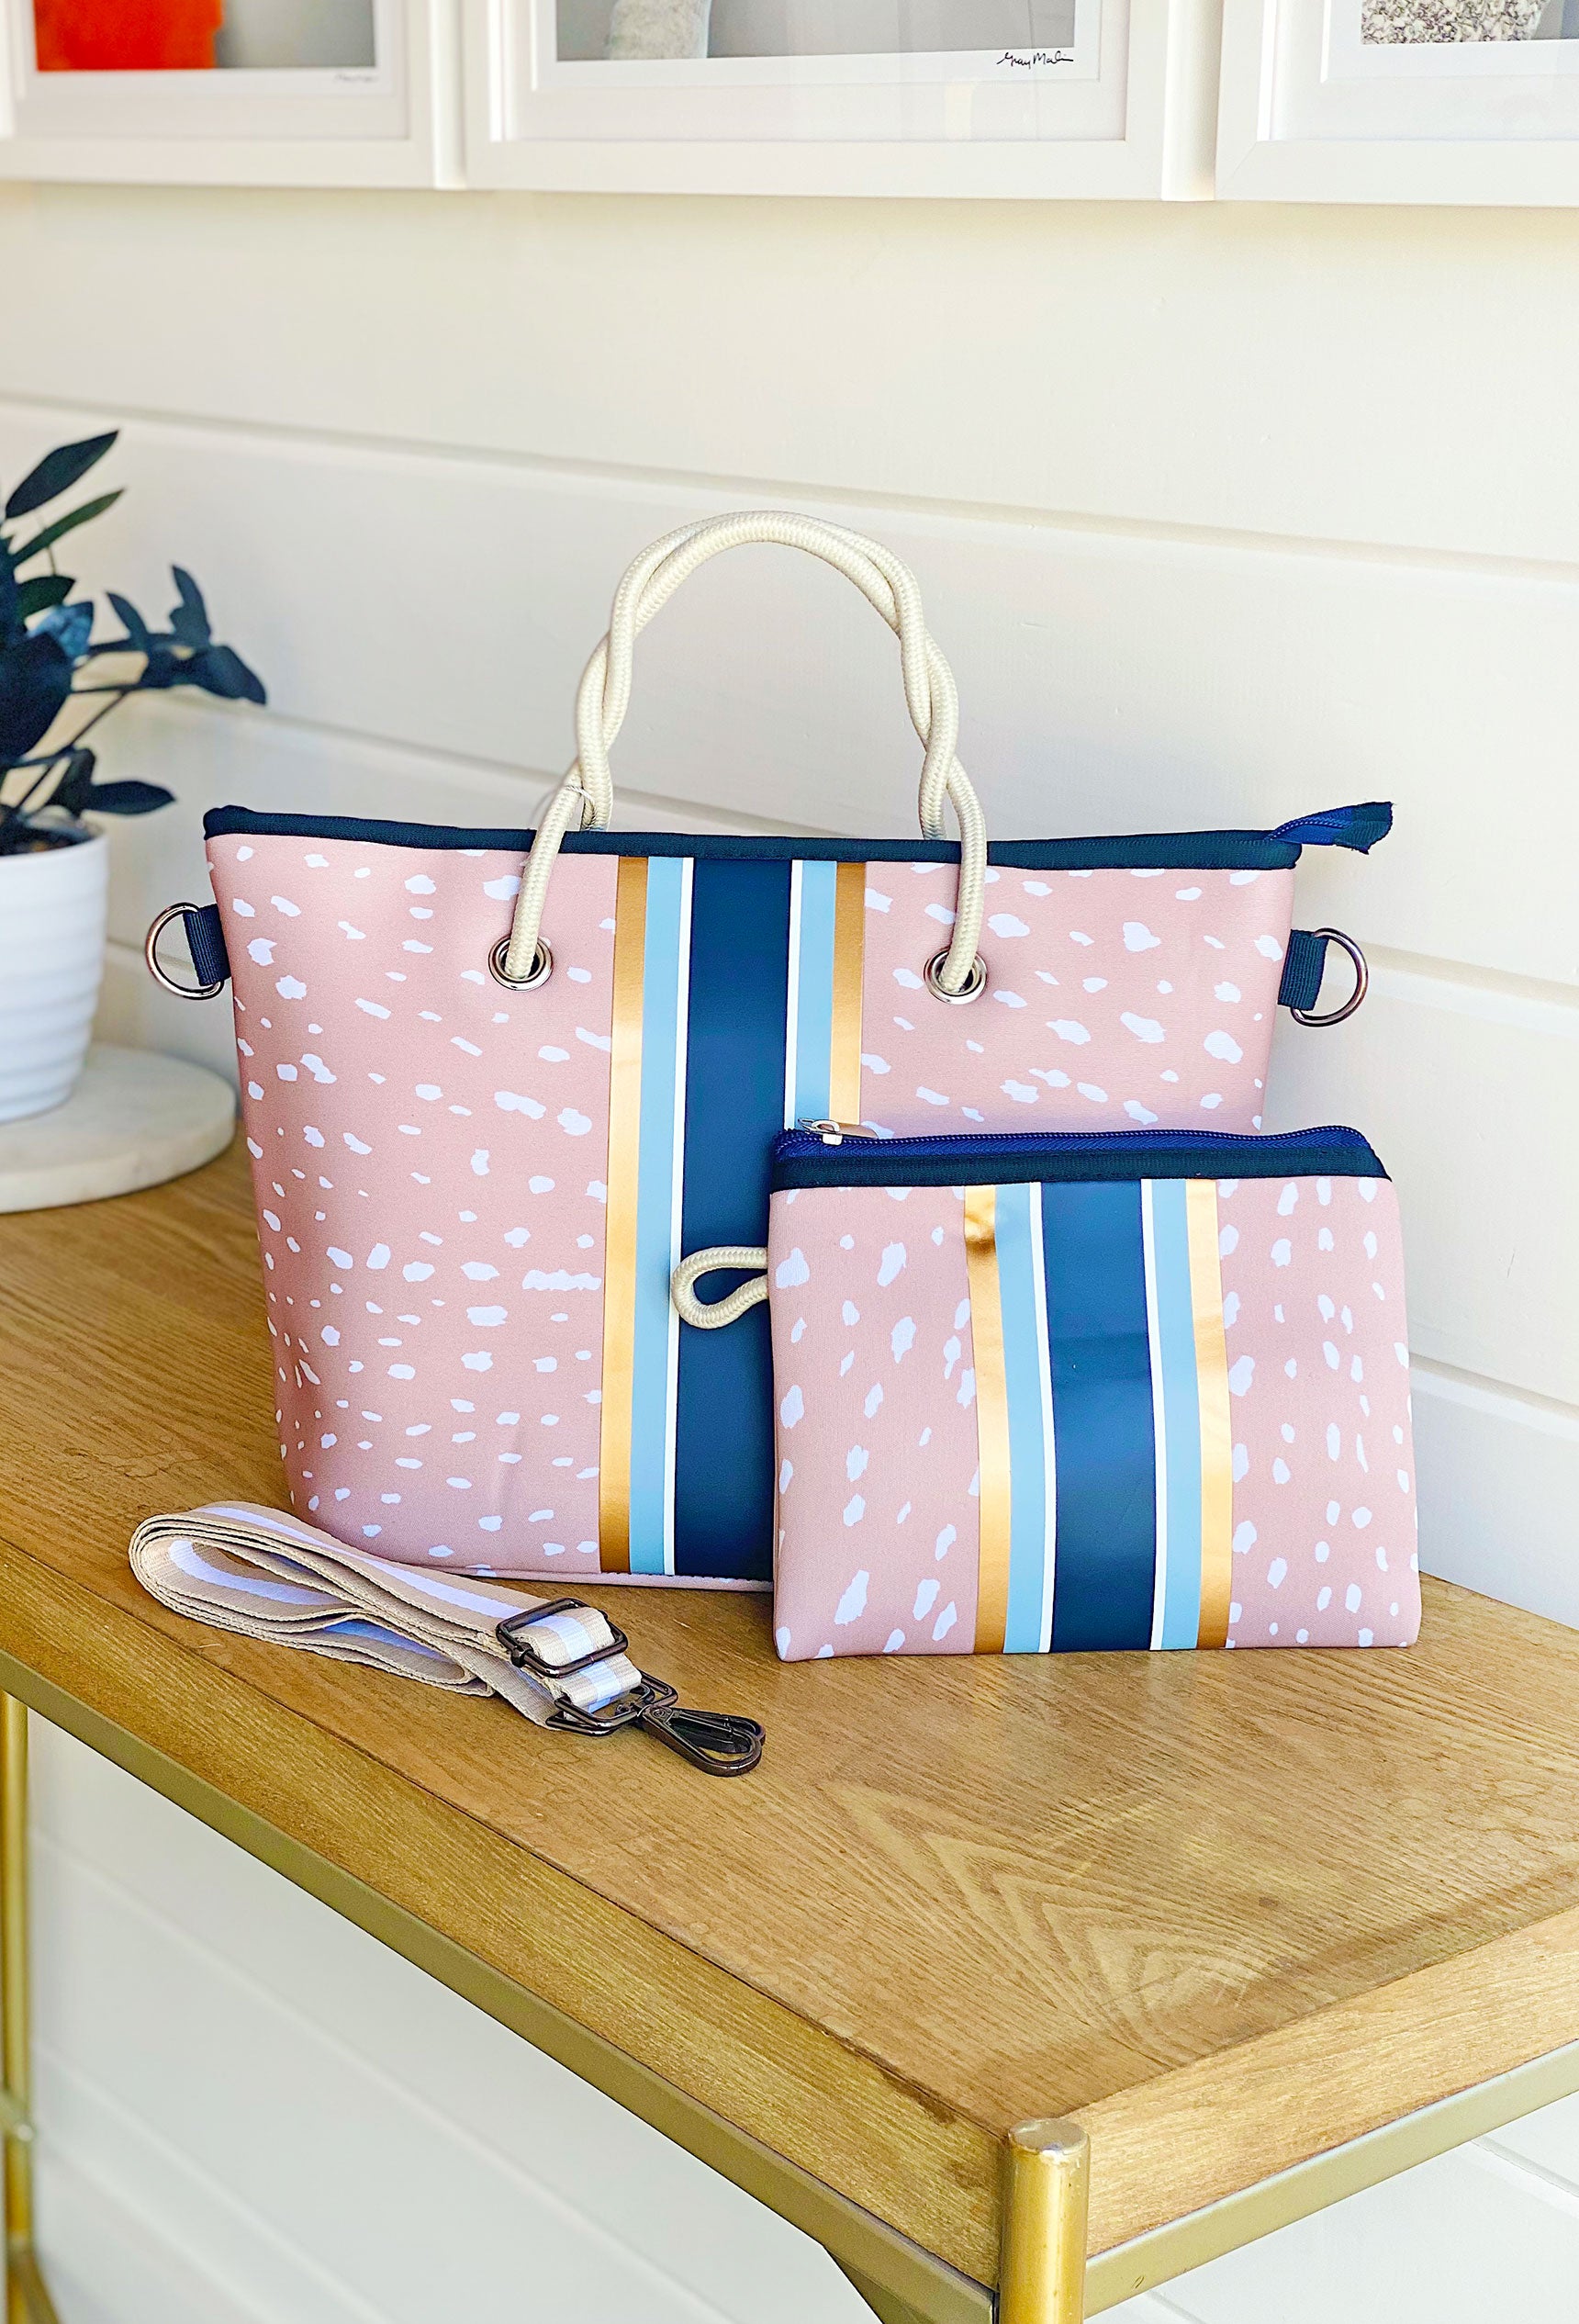 The Ann Neoprene Mini Tote, taylor gray mini tote, fawn background with blue and gold stripes, striped crossbody strap, comes with coin purse to match